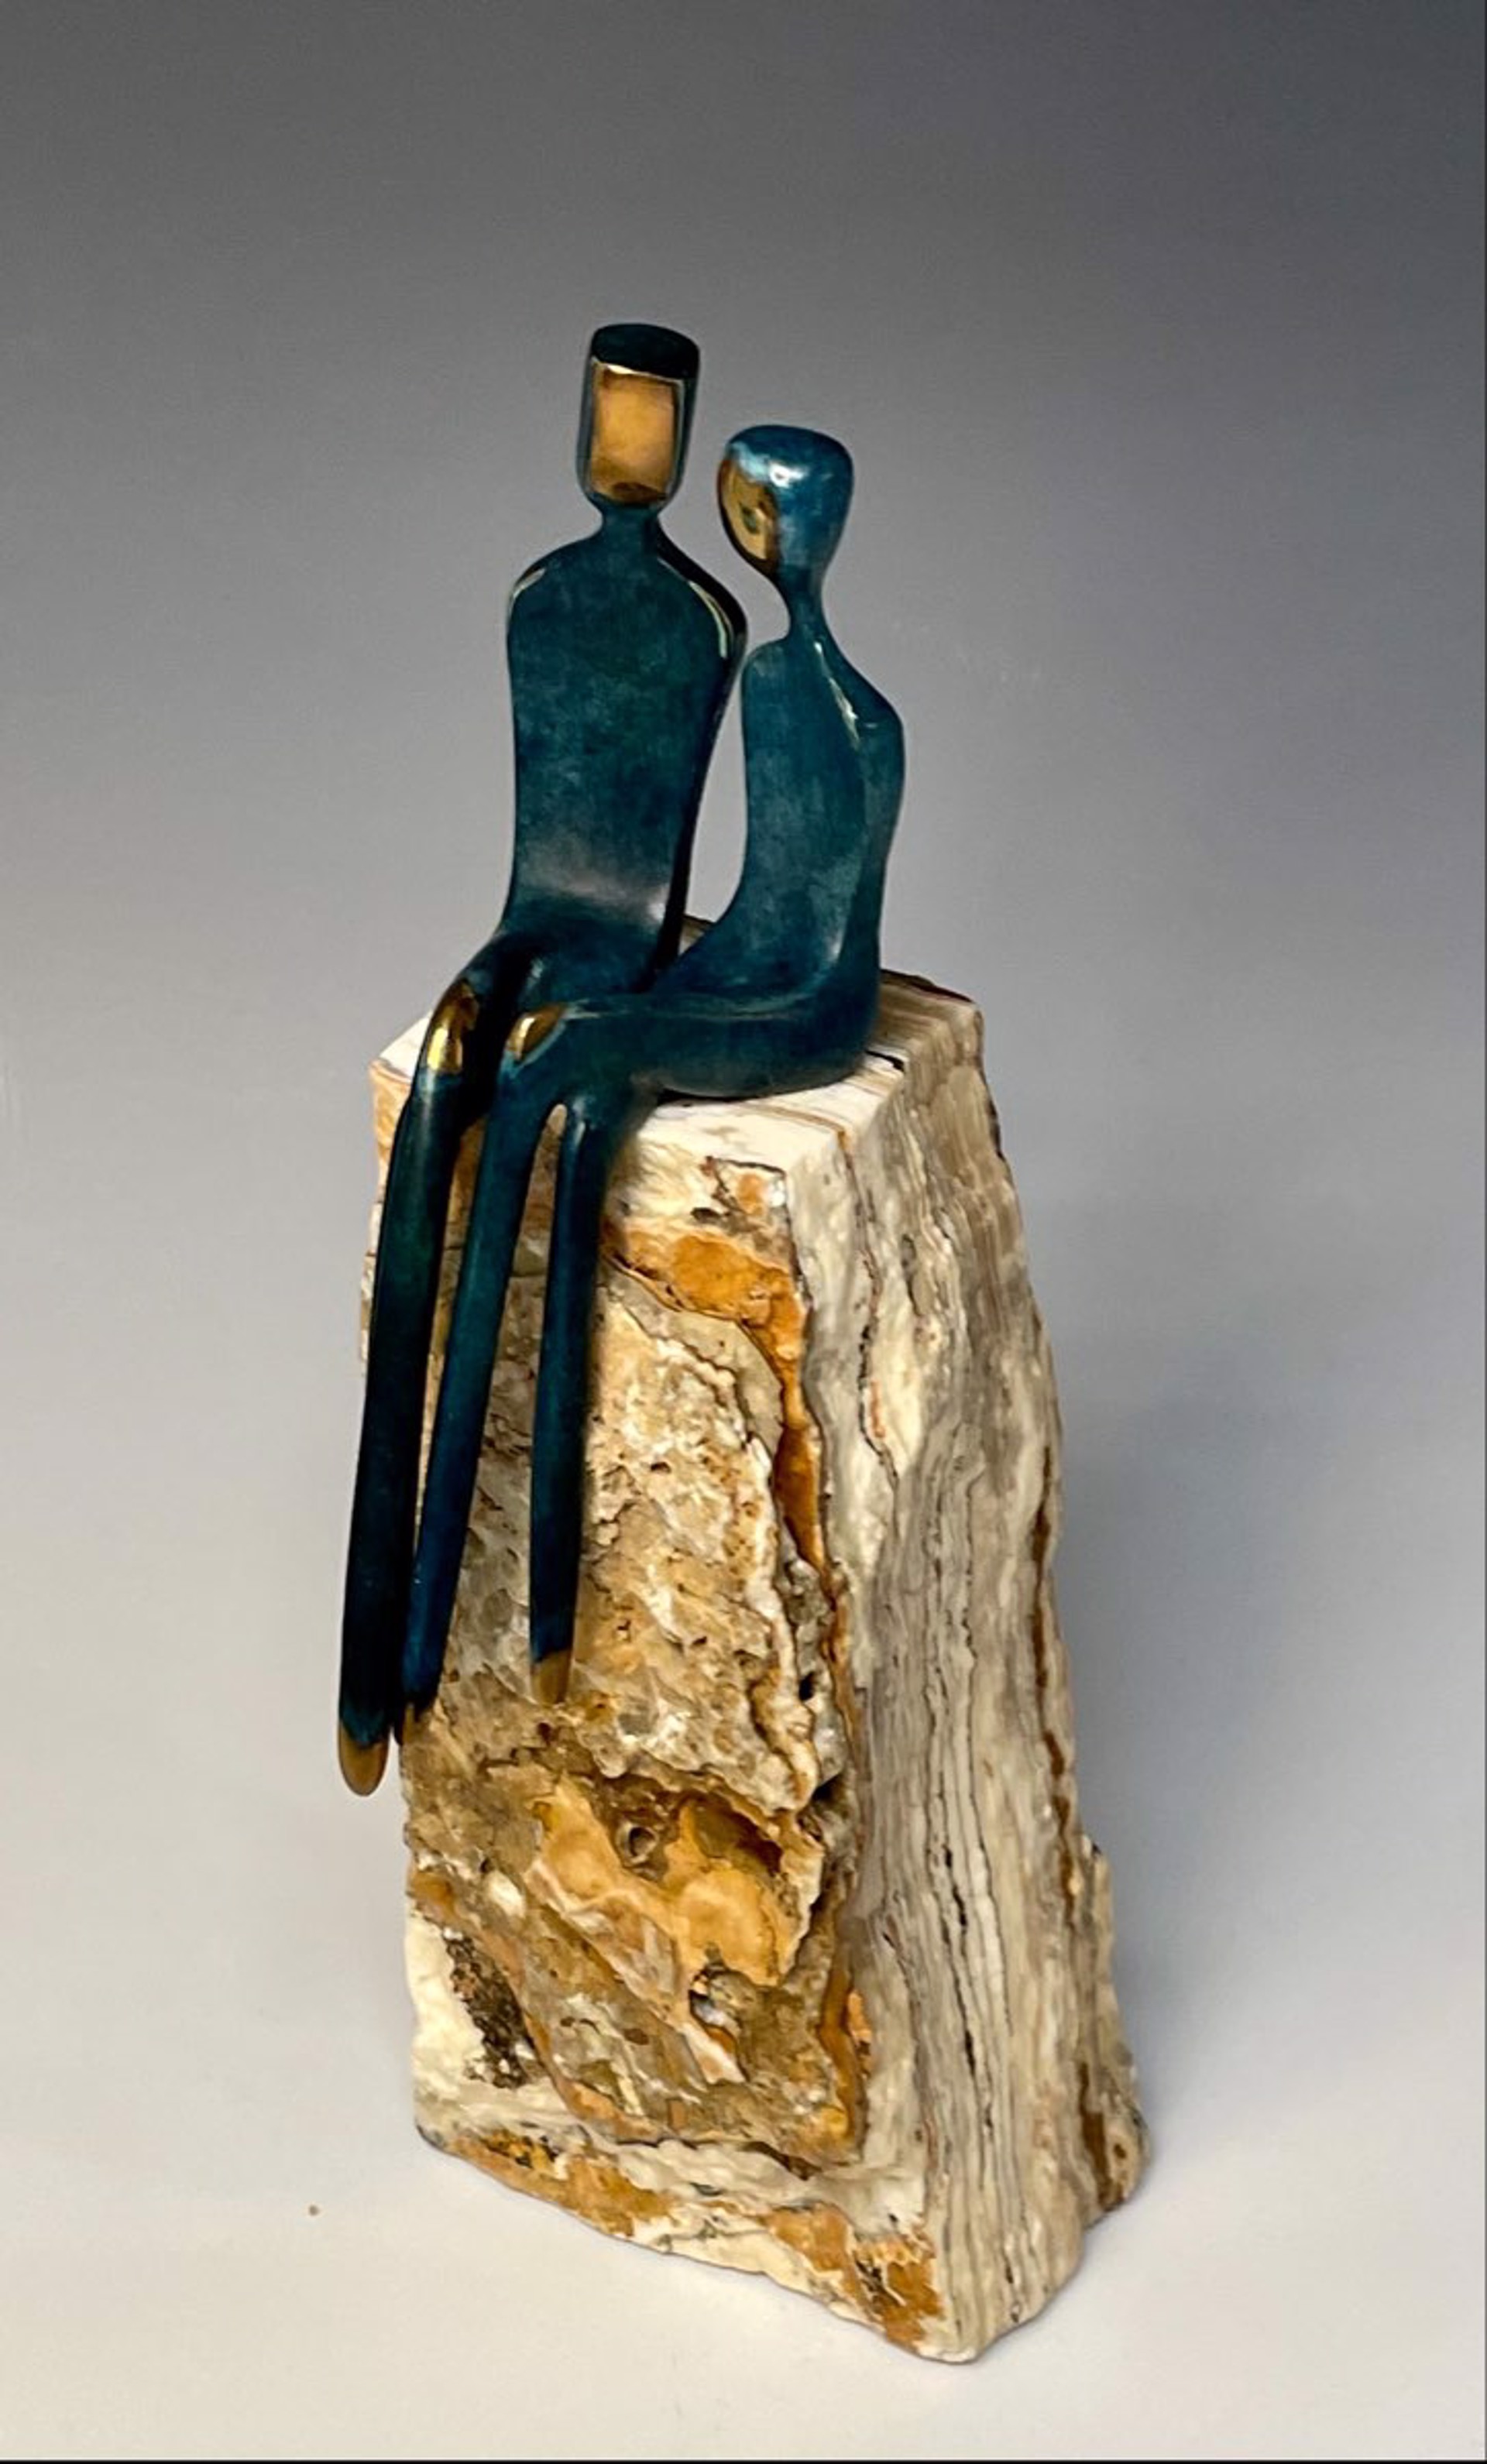 The Two of Us ~ Mounted on Limestone with Teal Patina by Yenny Cocq